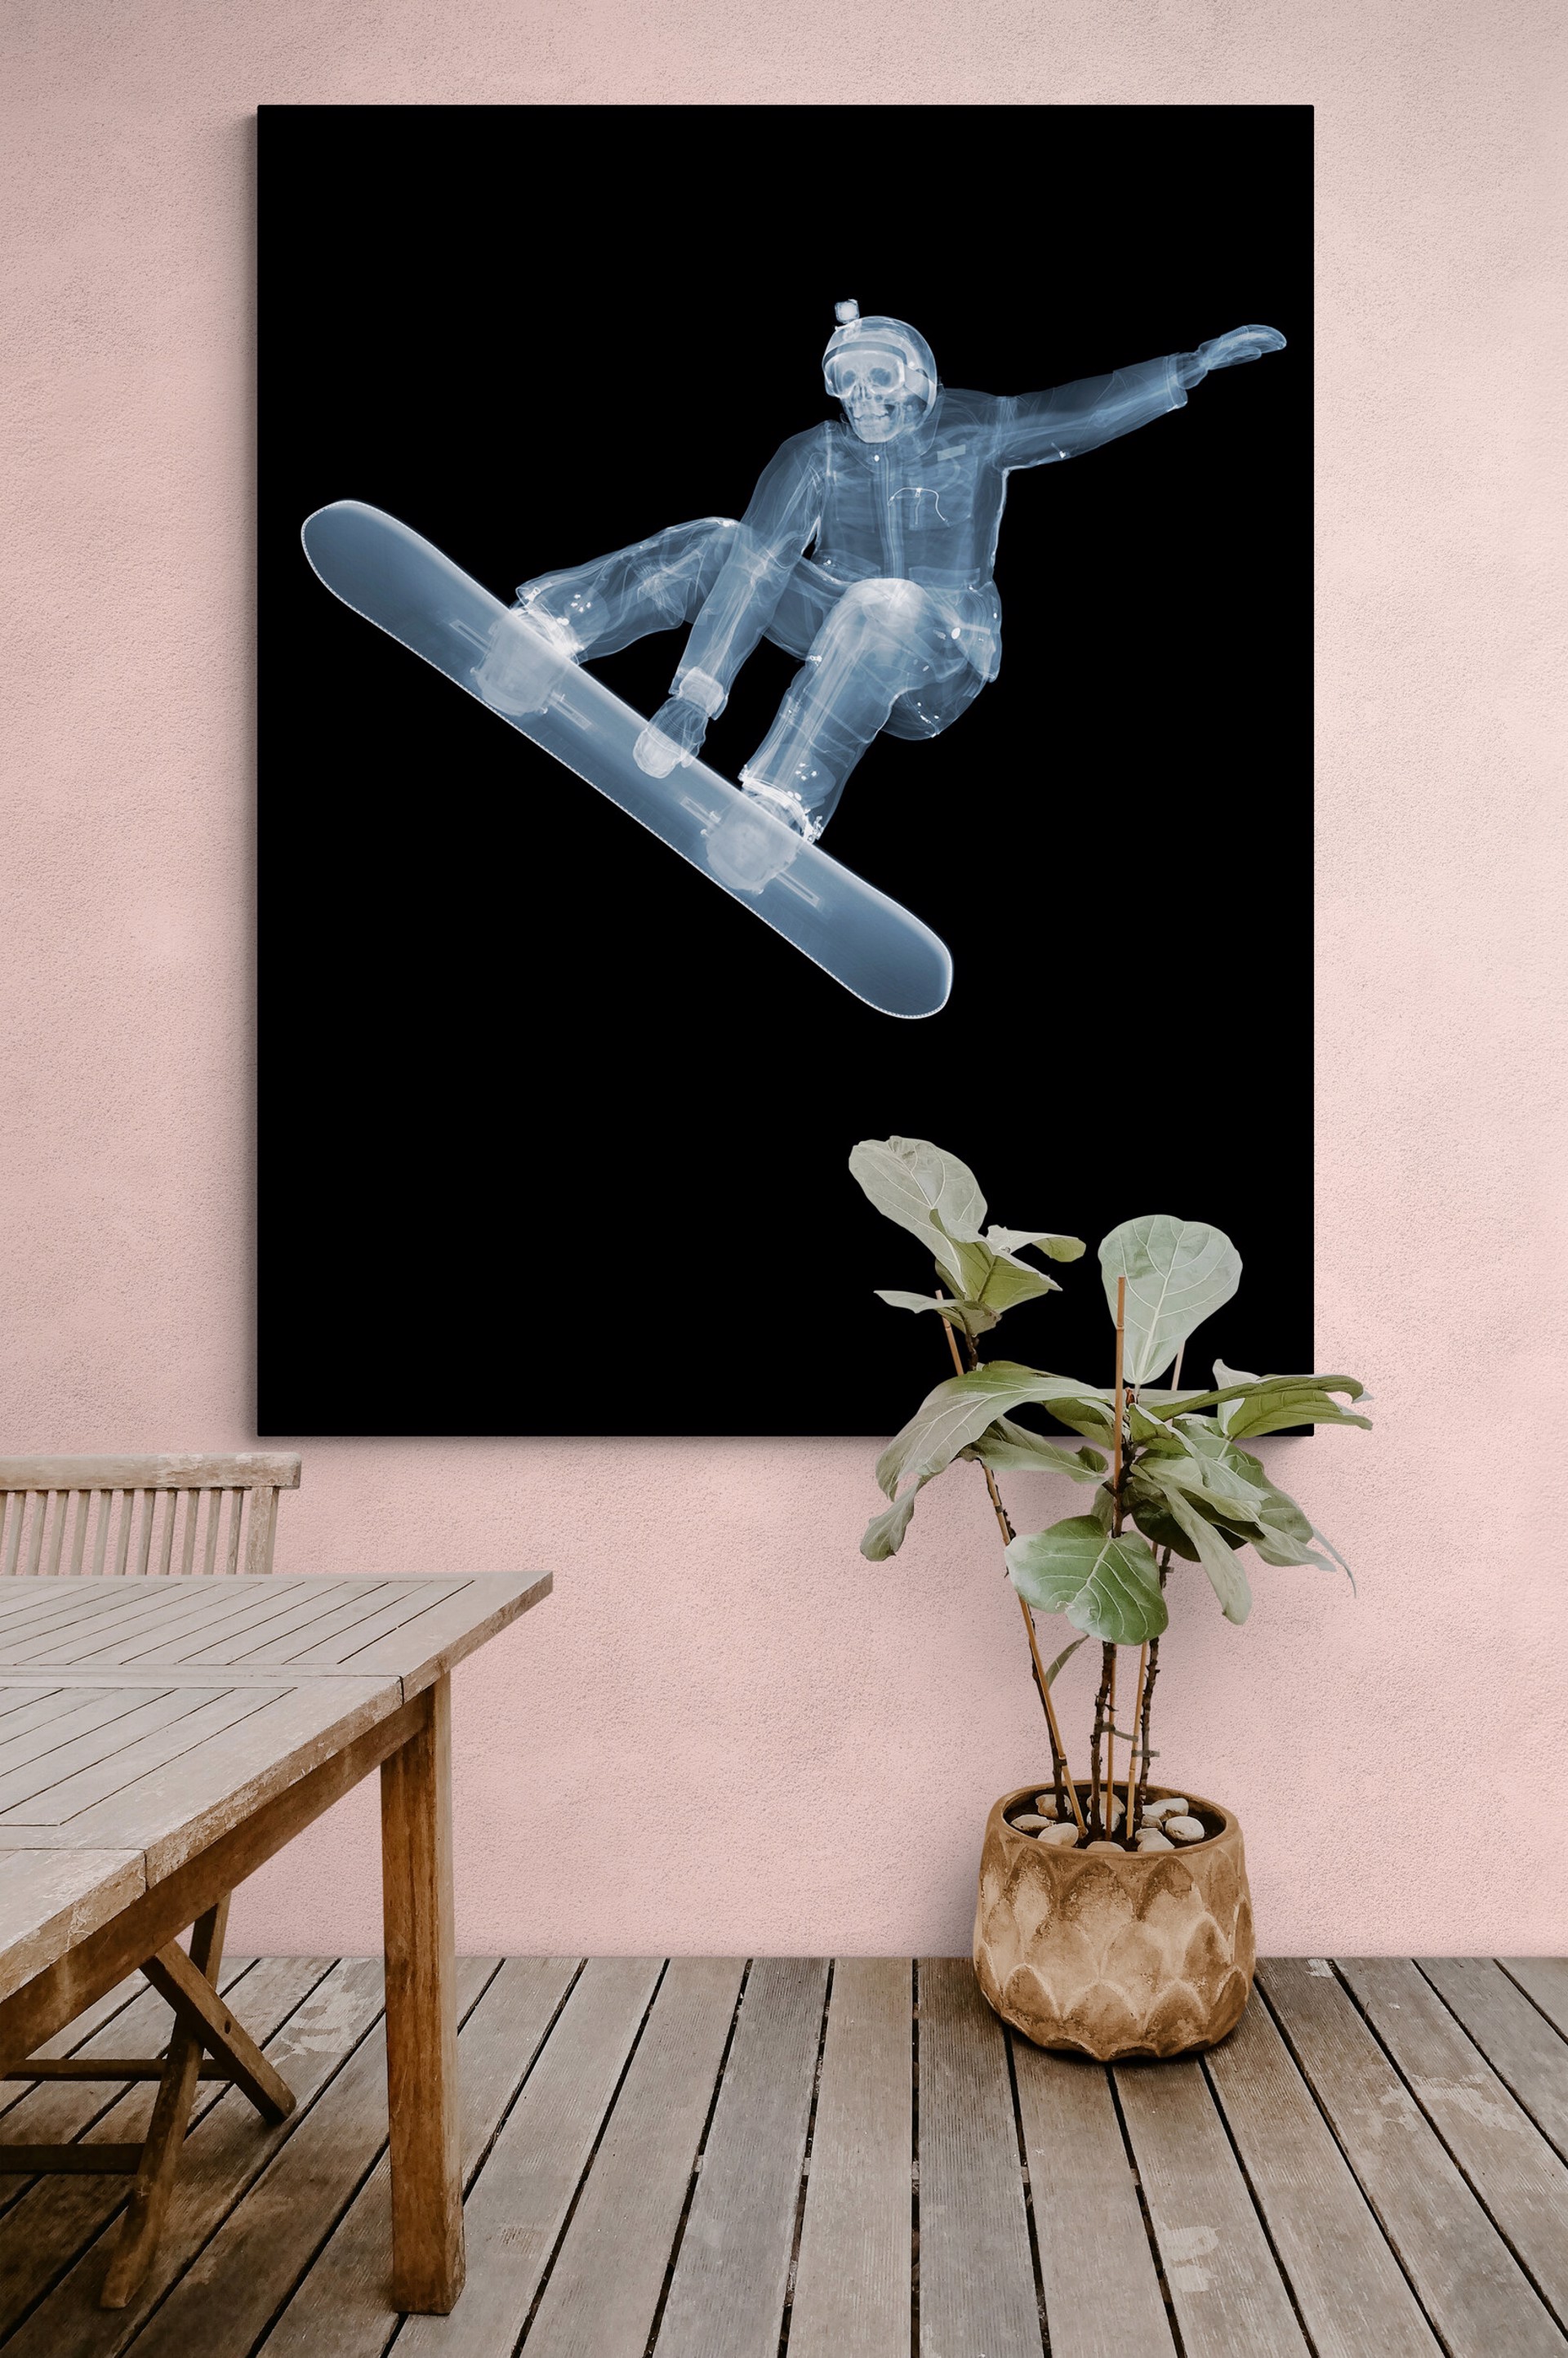 Snowboarder by Nick Veasey